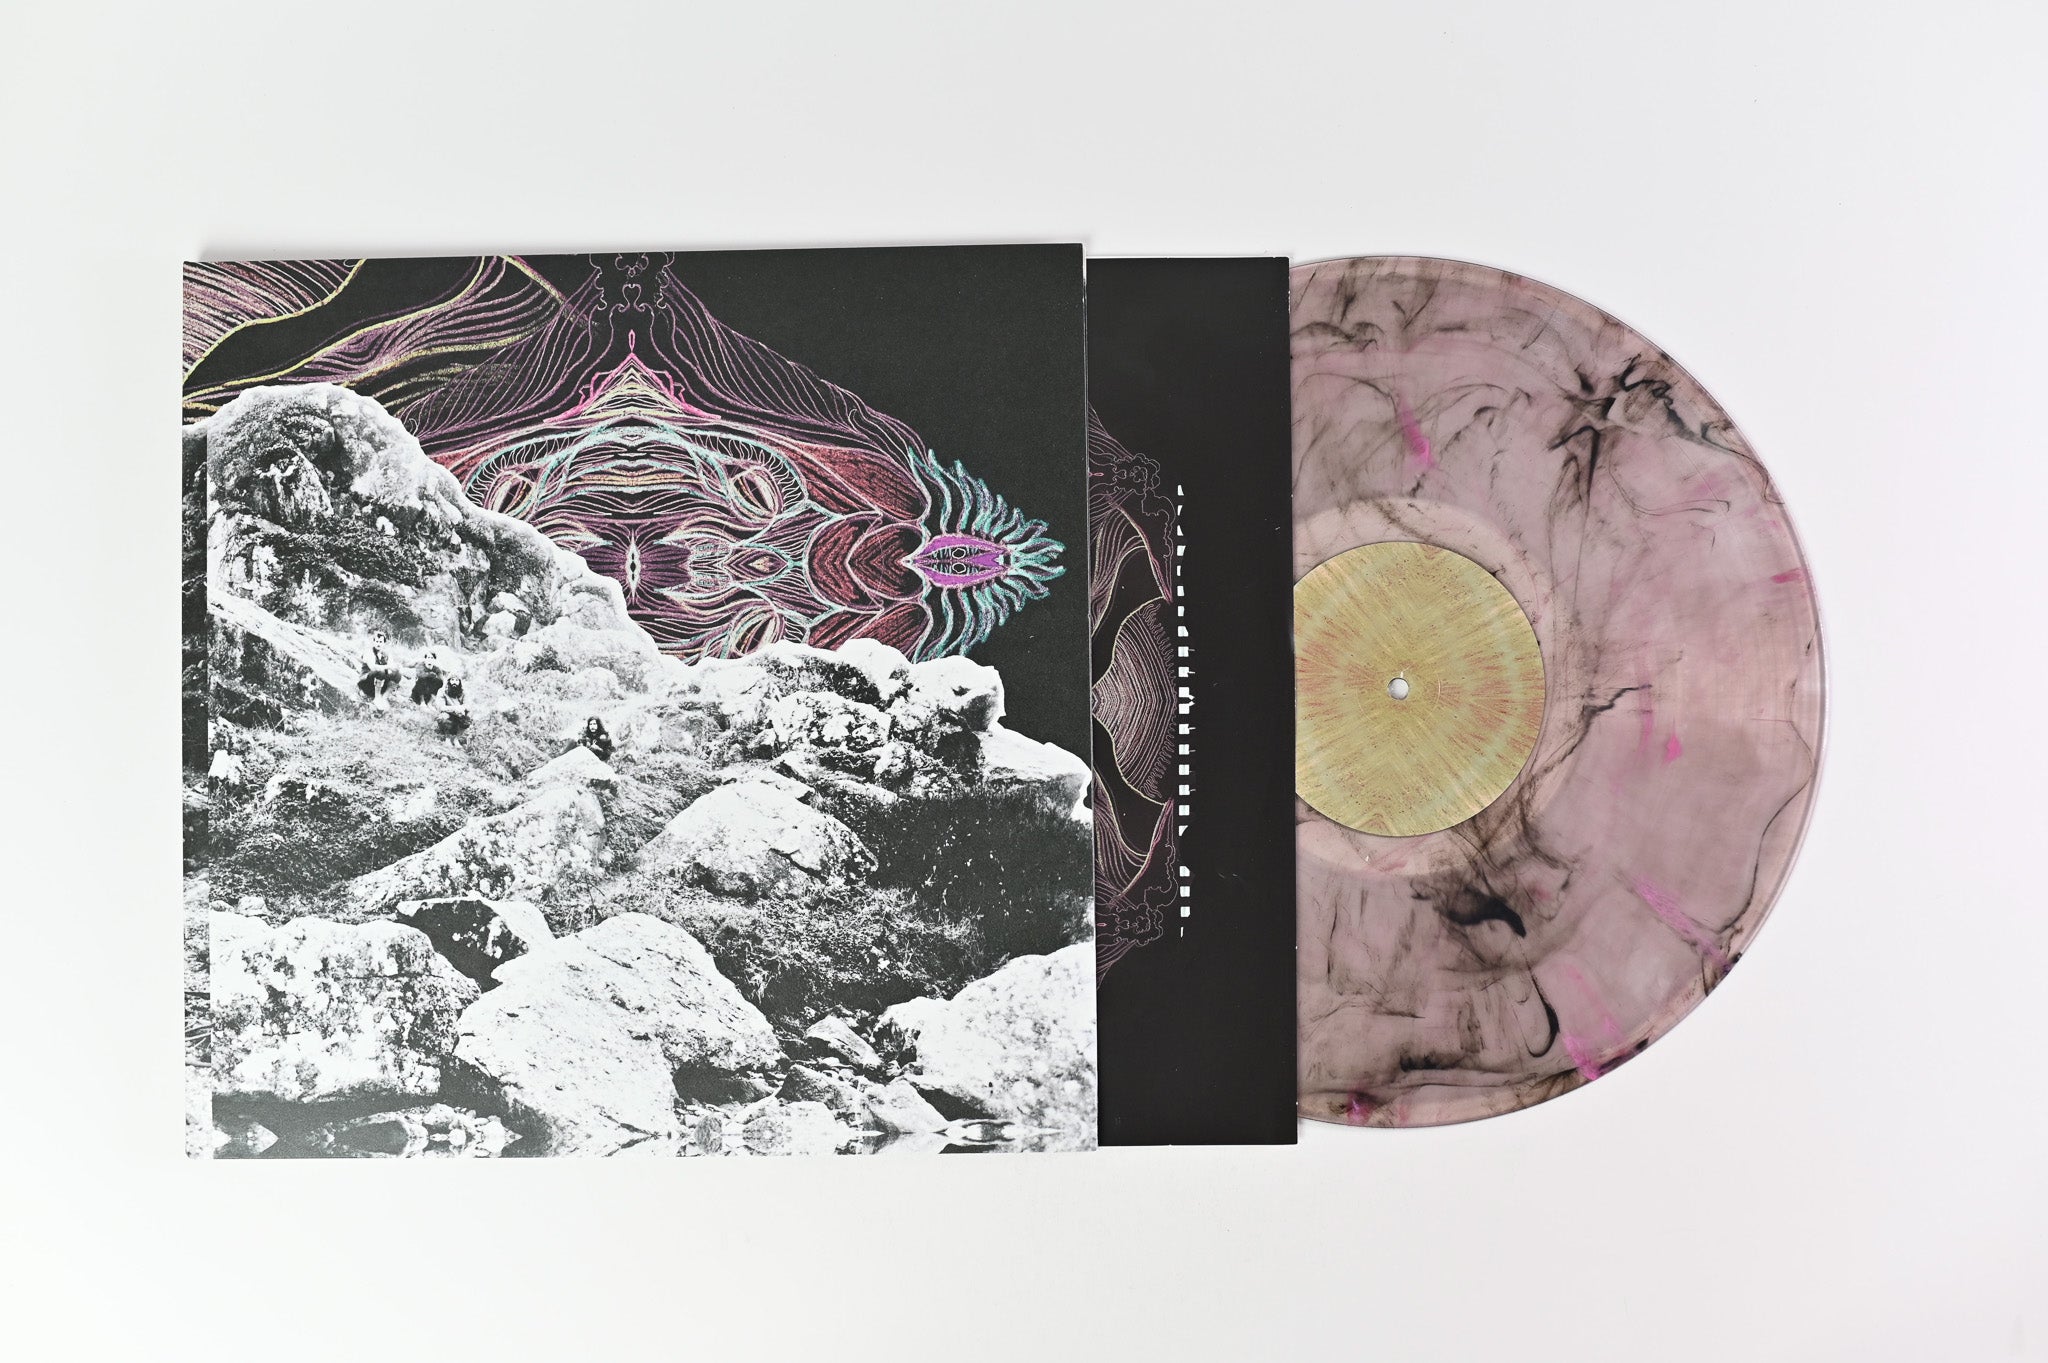 All Them Witches - Dying Surfer Meets His Maker on New West Ltd Pink Smoke